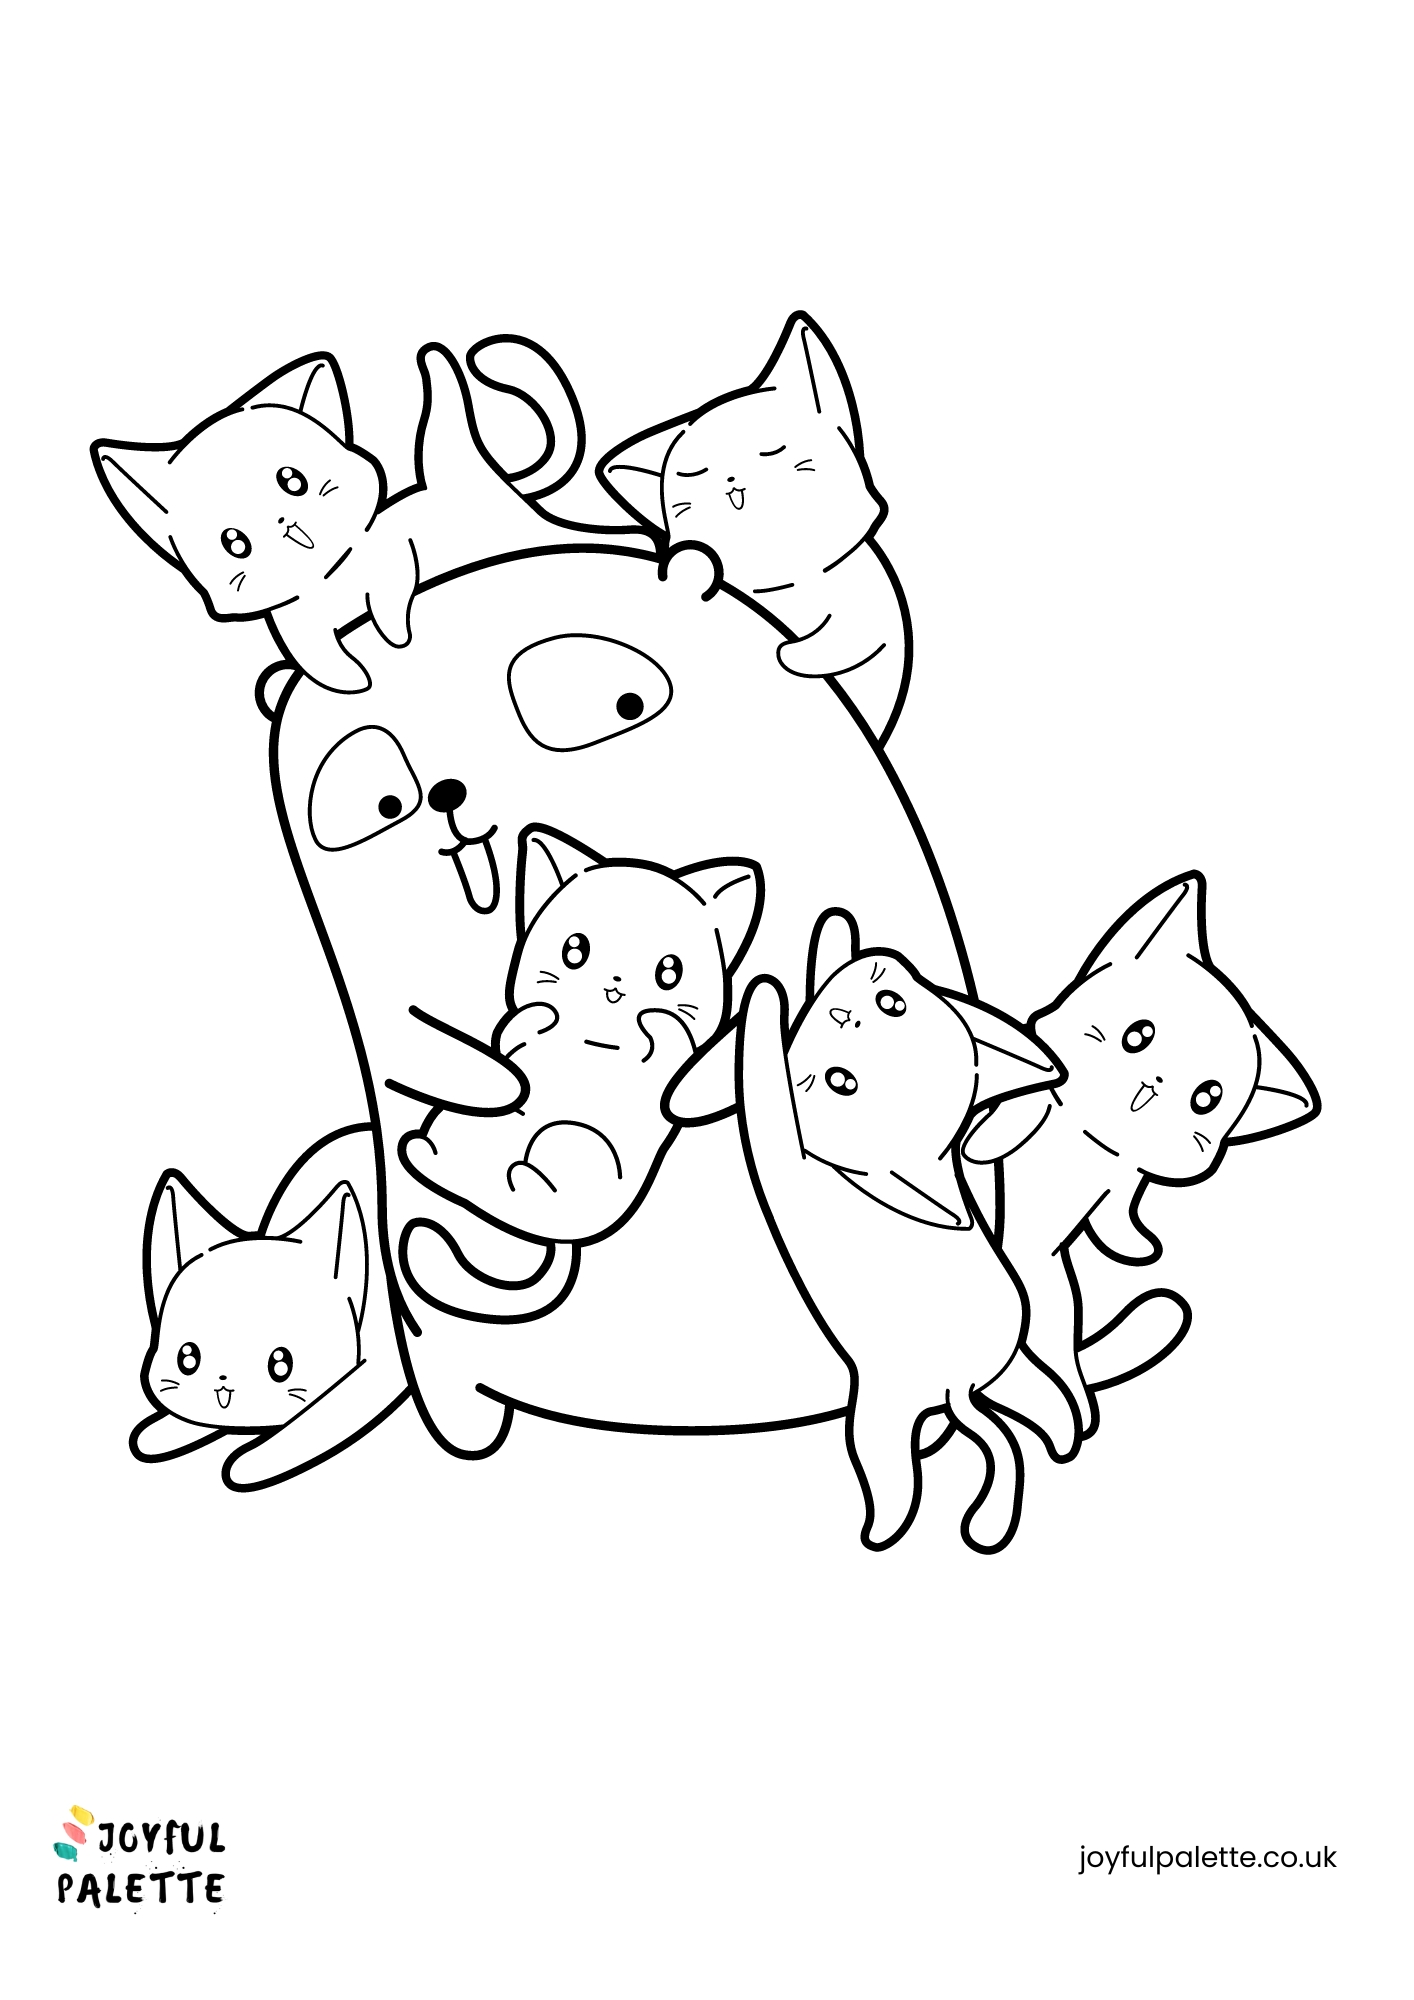 Coloring Pages with Cats